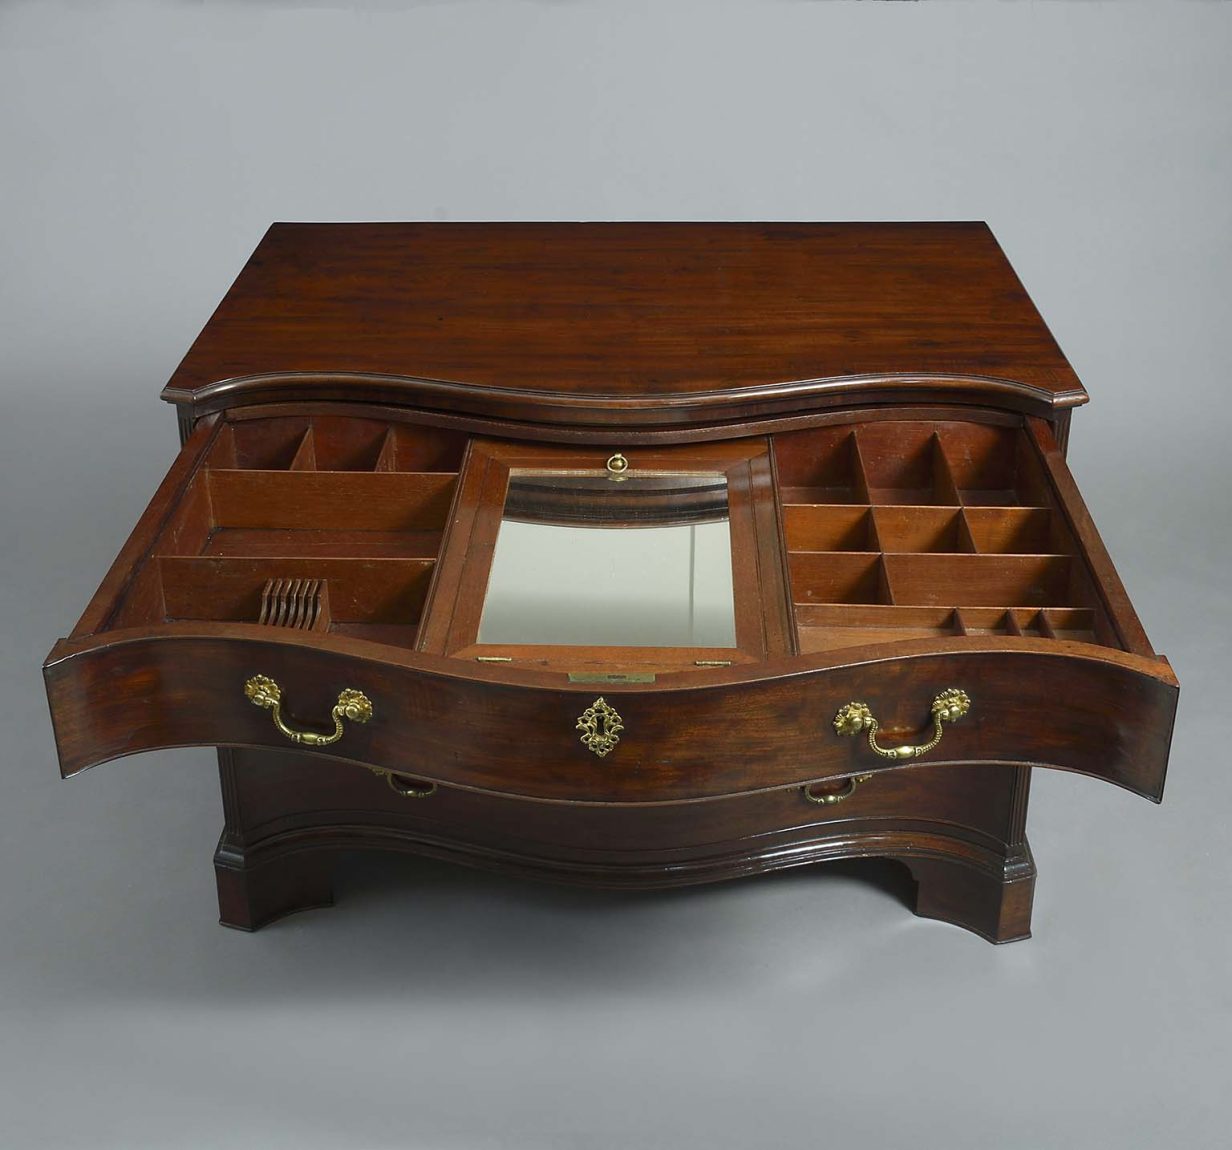 Chippendale dressing commode